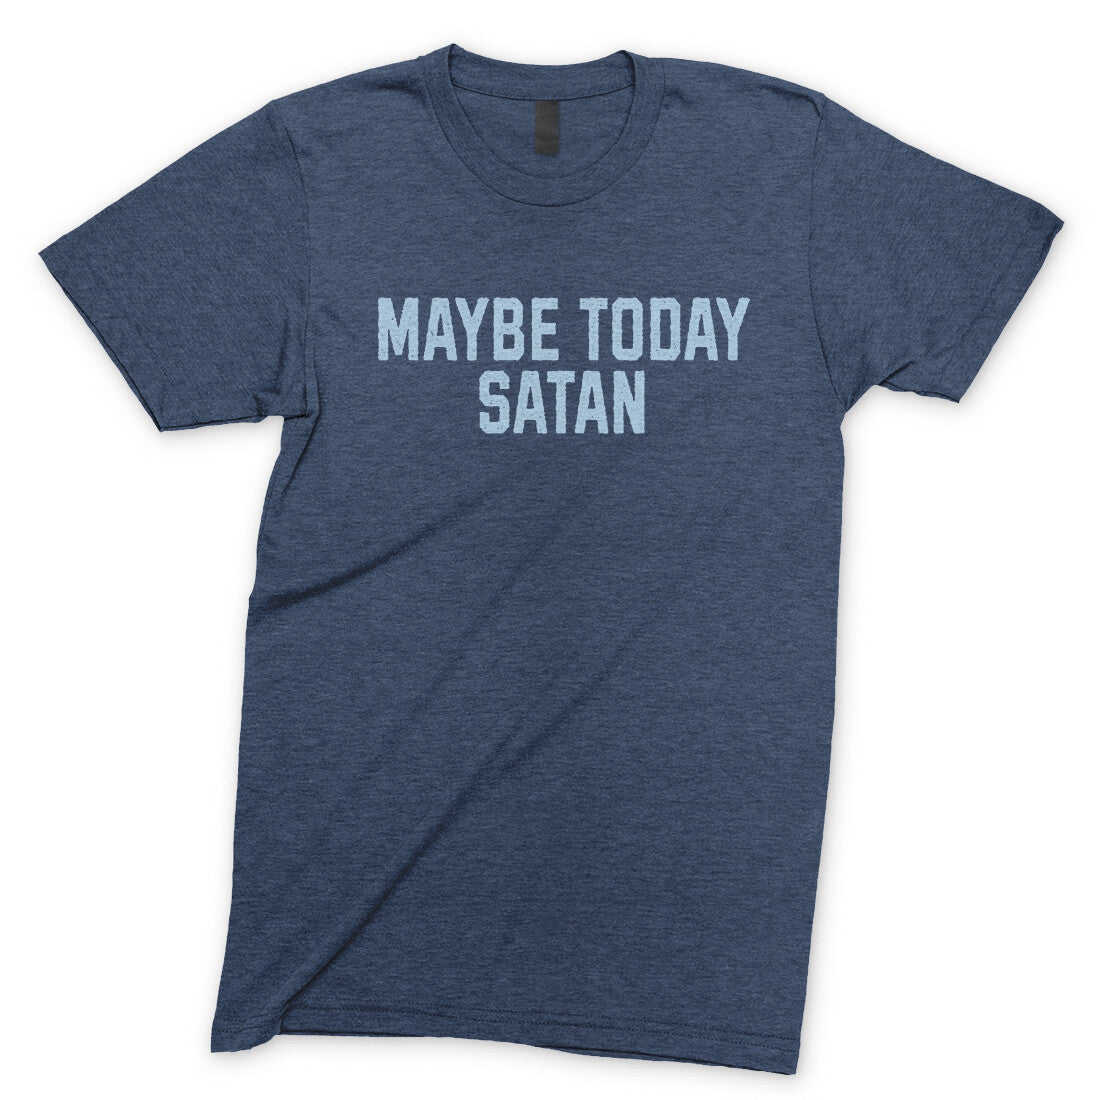 Maybe Today Satan in Navy Heather Color